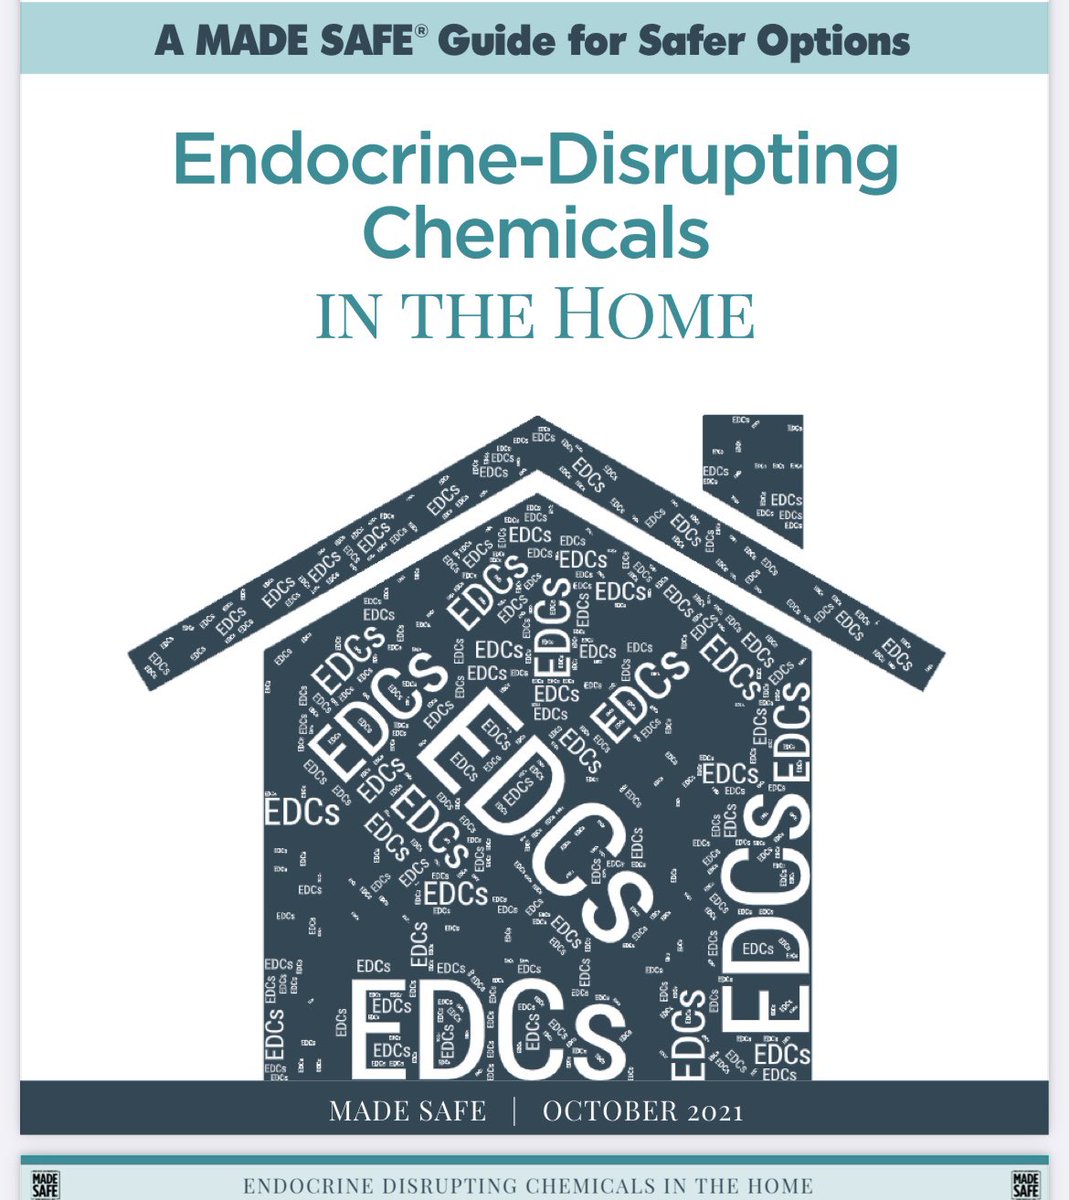 Tips for Reducing Your Exposure to Endocrine-Disrupting Chemicals: madesafe.org/blogs/viewpoin… #endocrinedisruptingchemicals